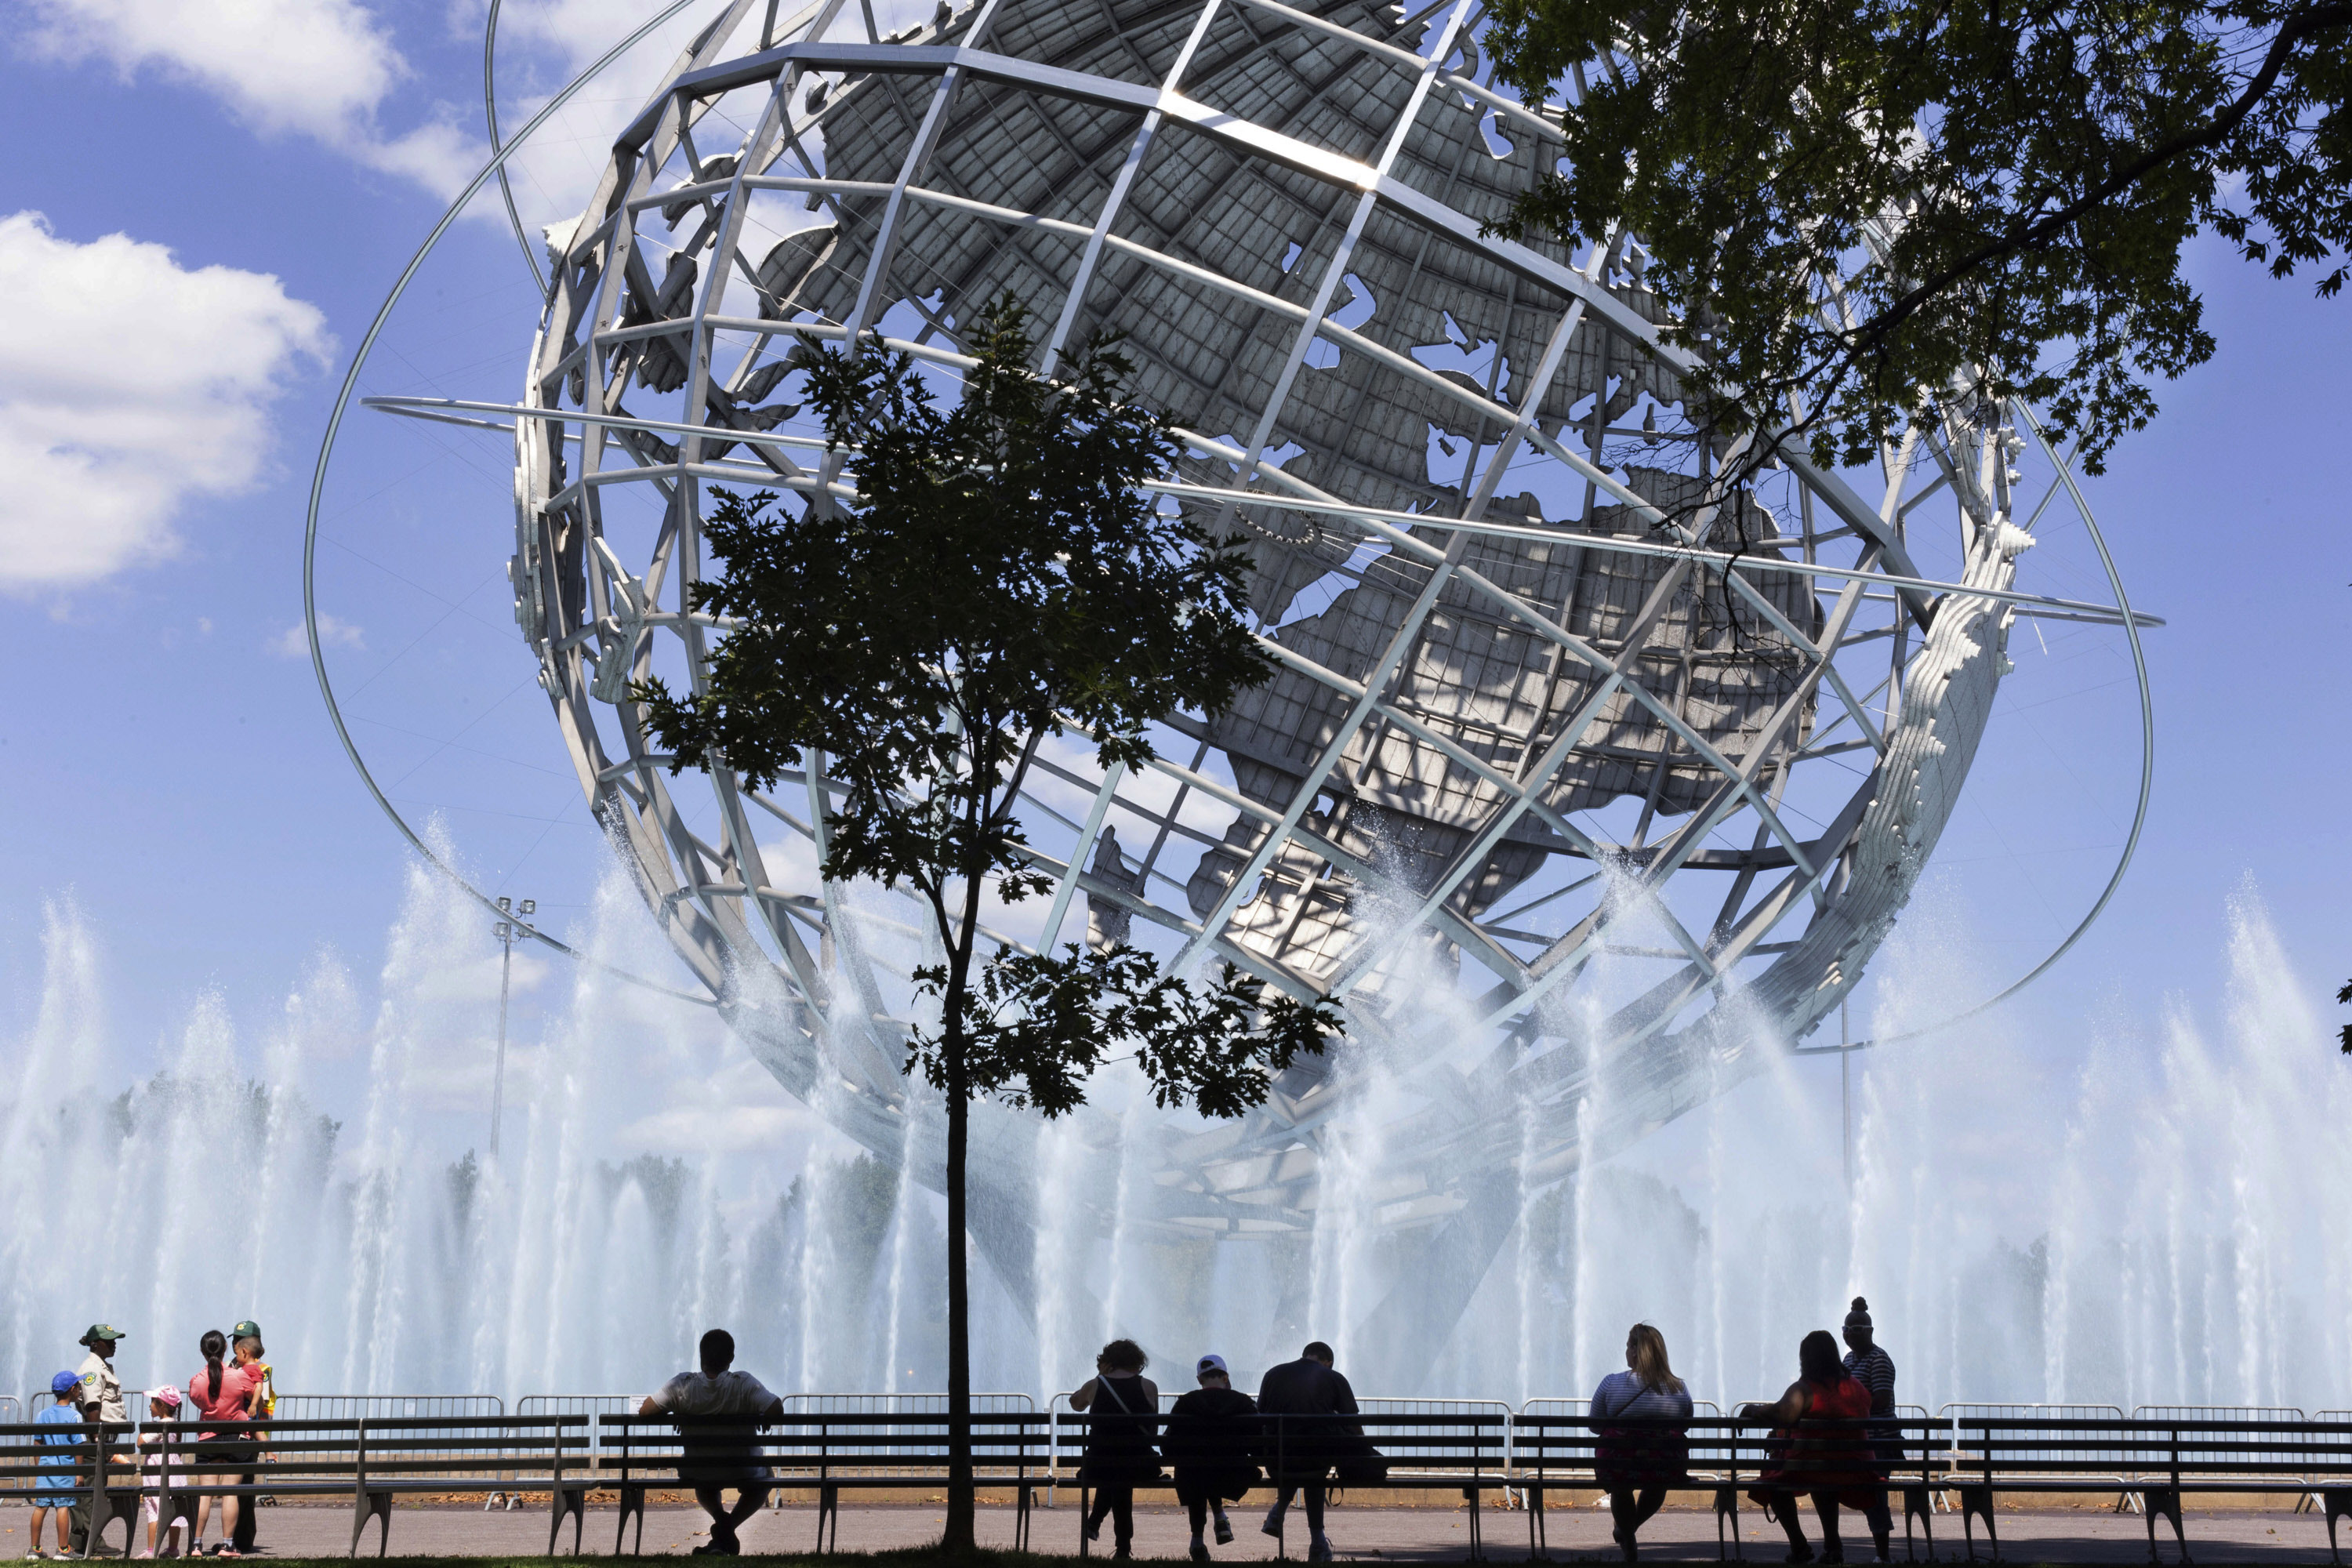 New York City Tourism + Conventions, Explore the Top Things to Do in NYC